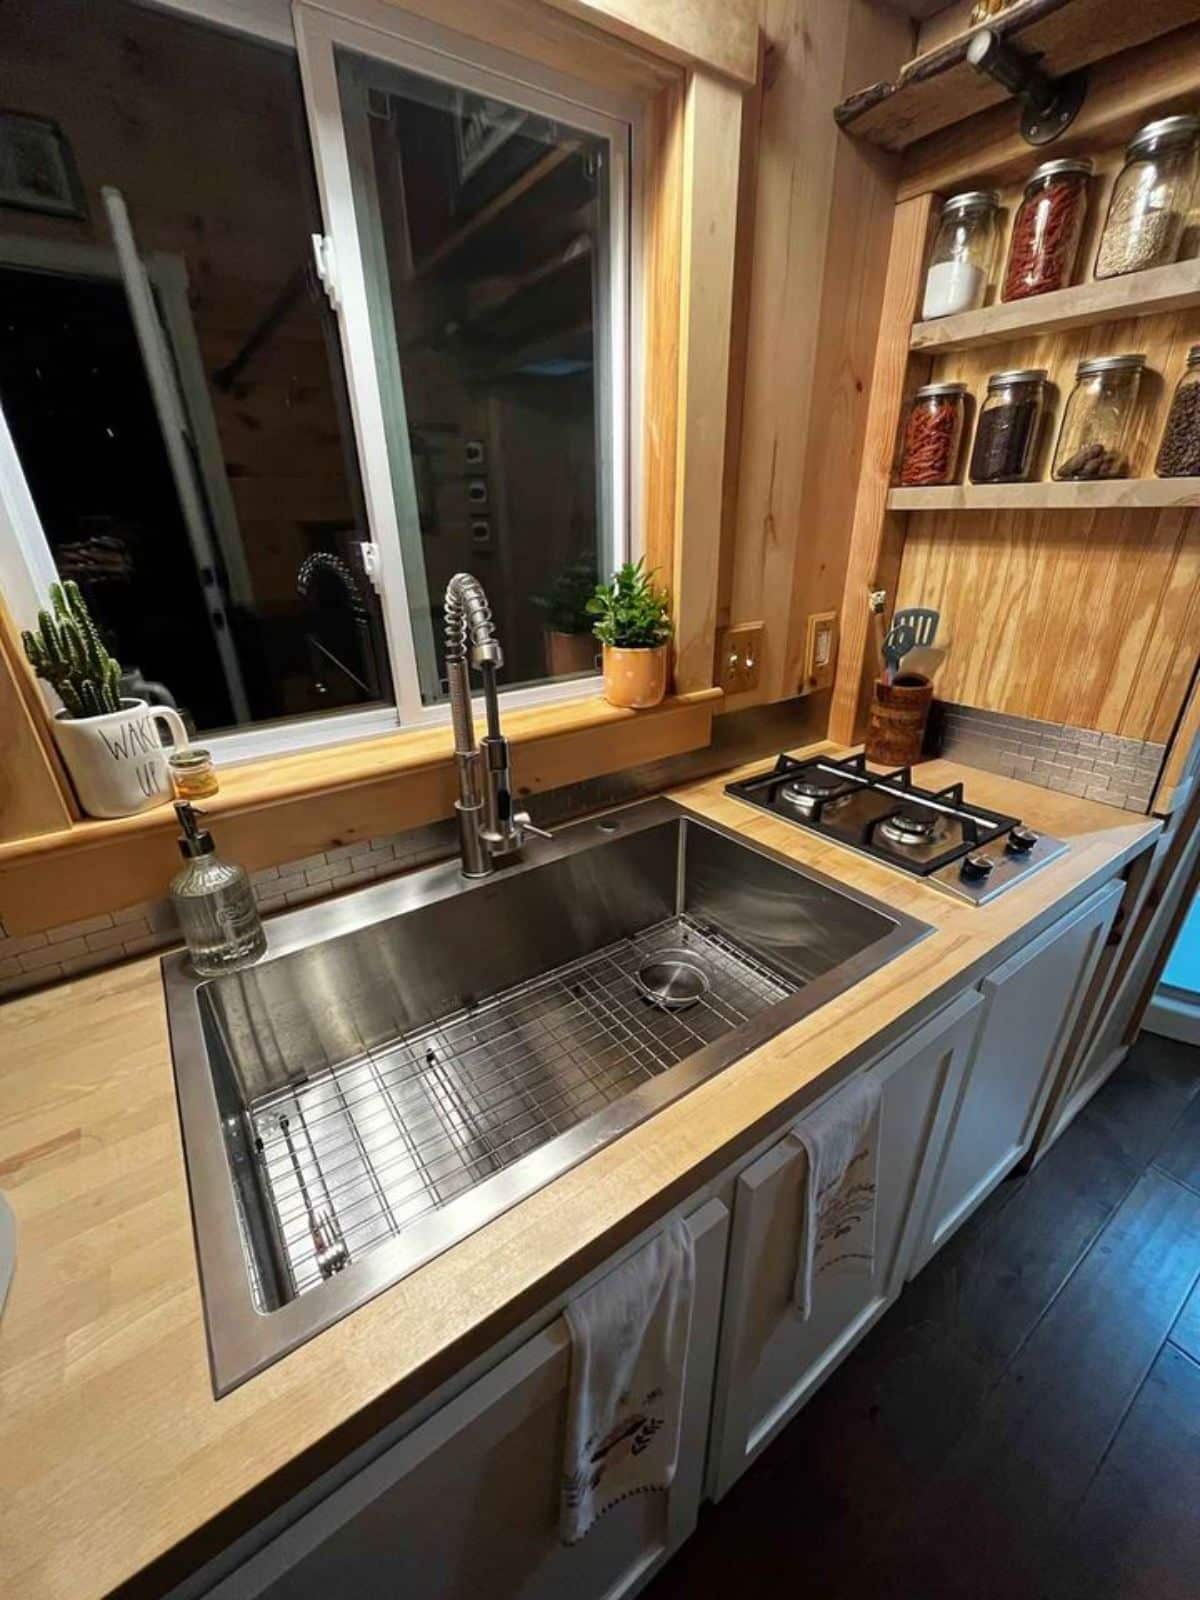 Propane gas burner, sink with storage and other shelves in kitchen